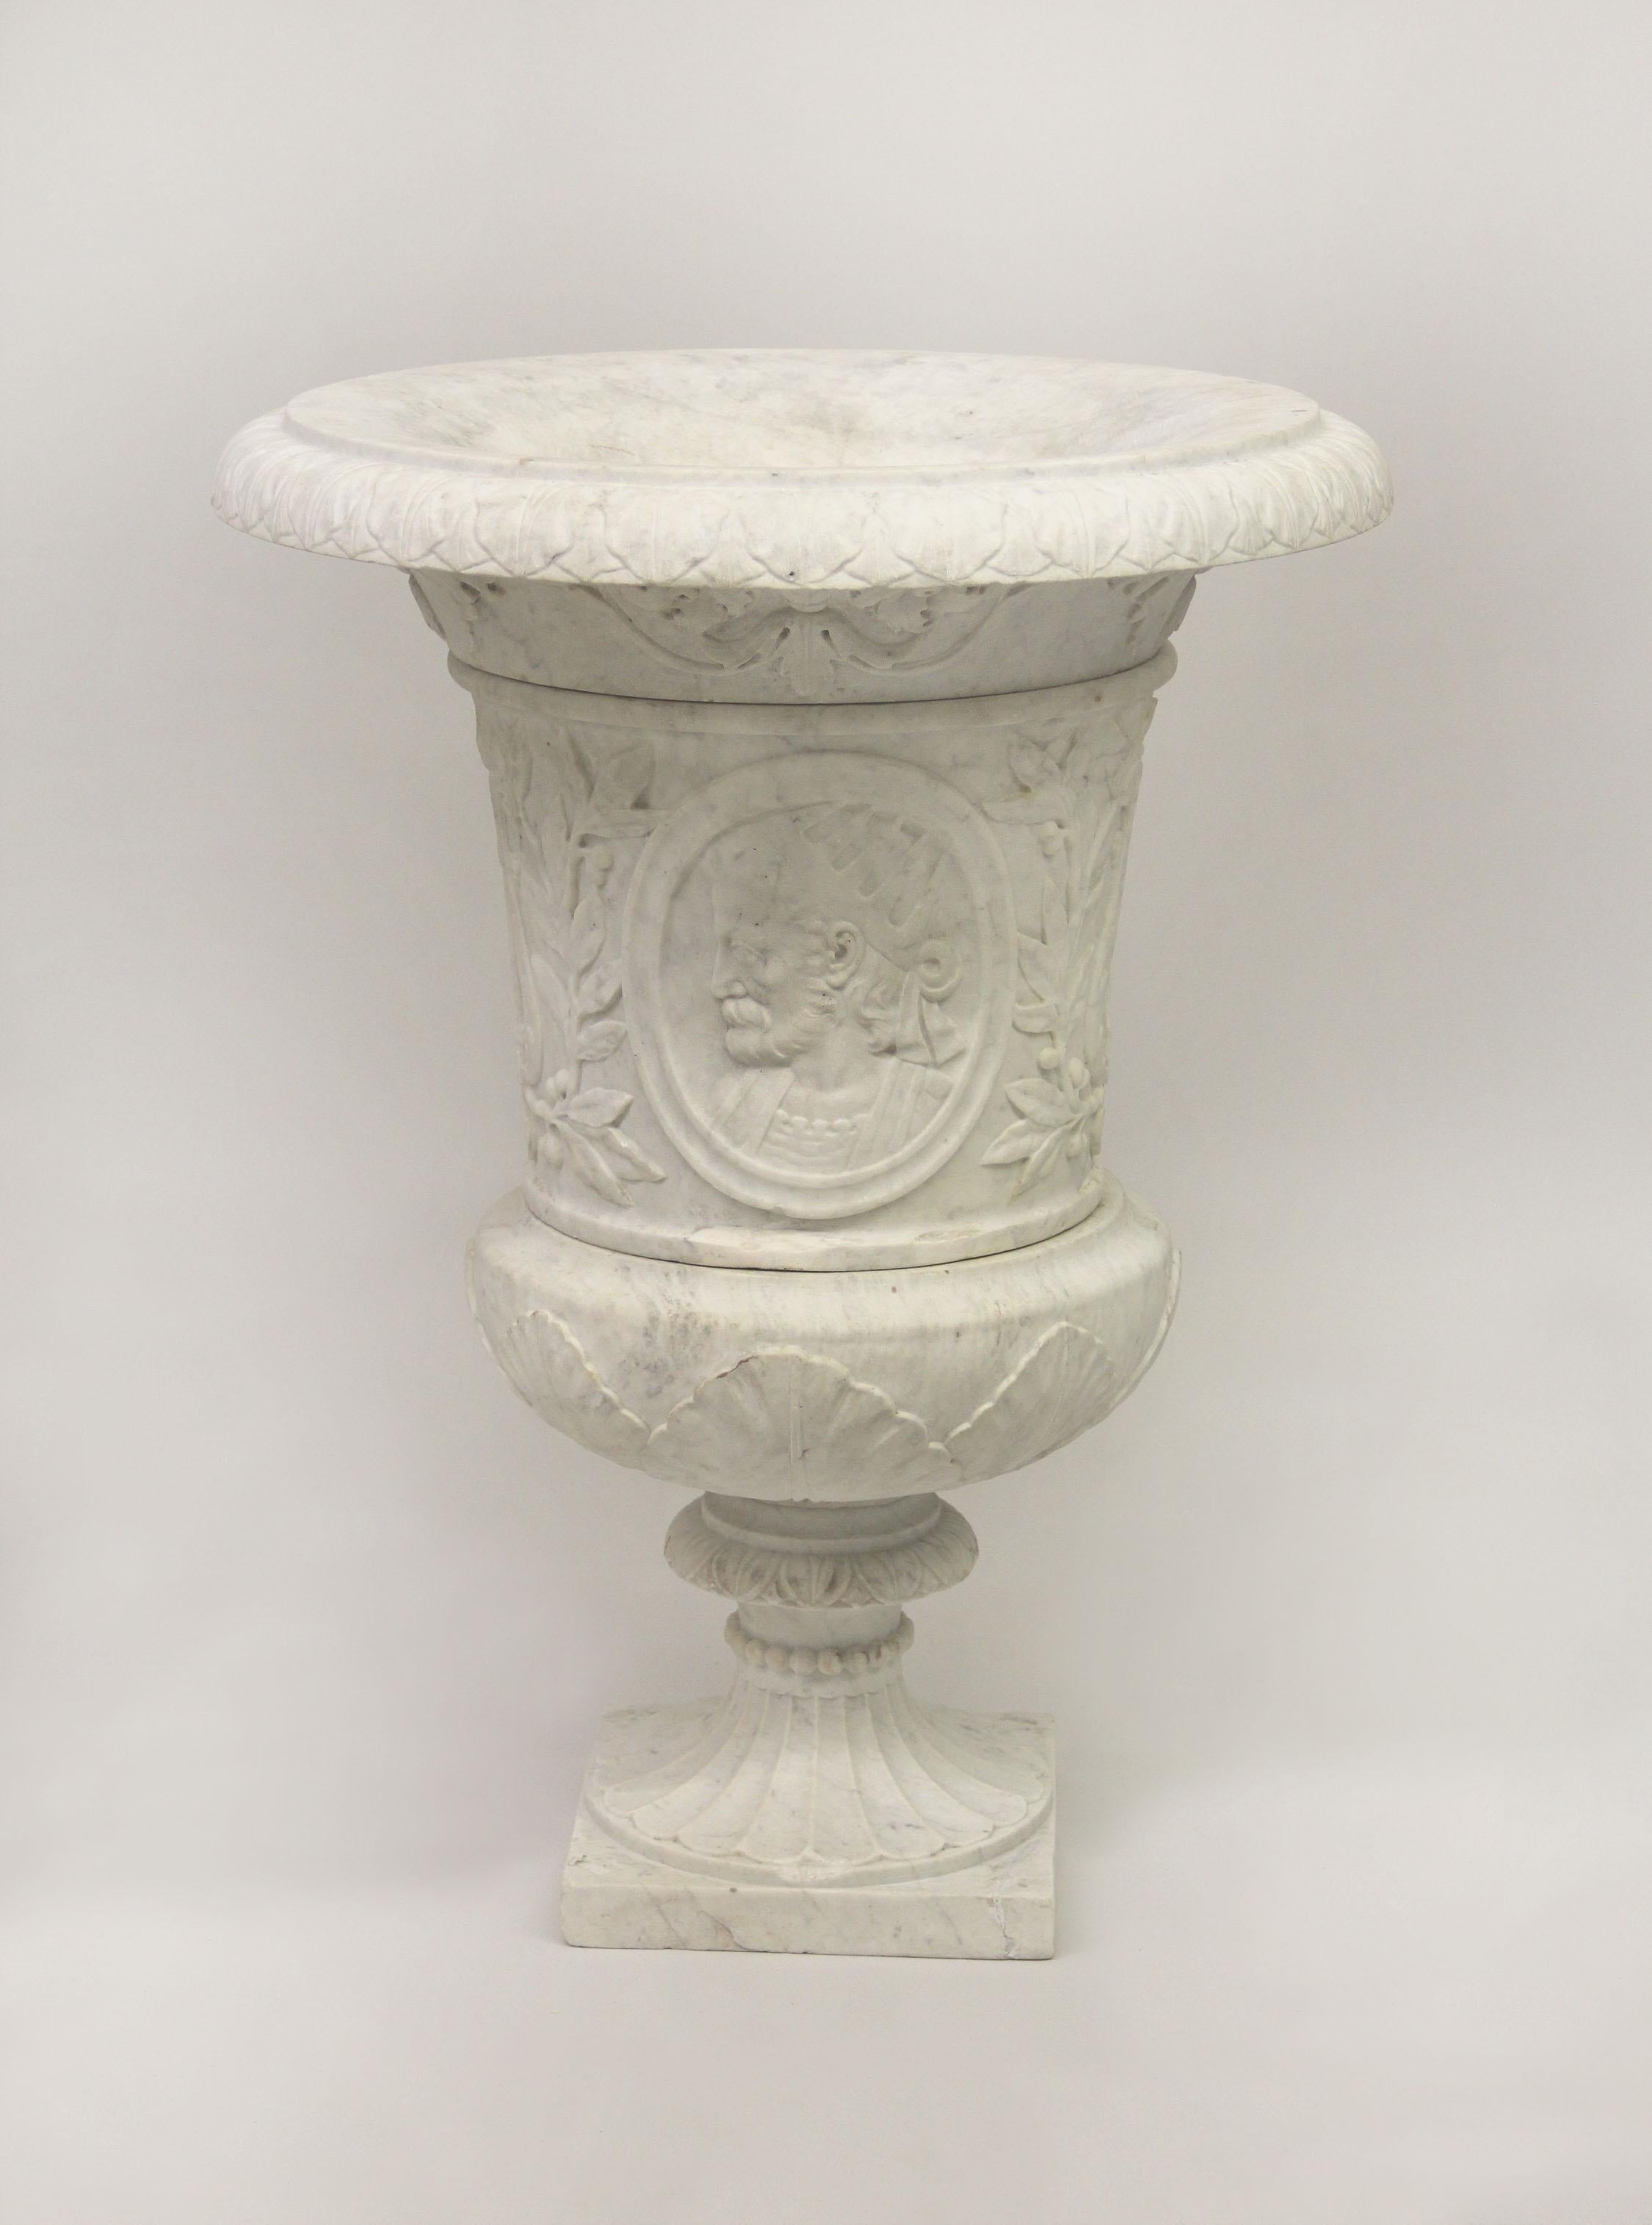 A very fine Early 20th Century hand carved Carrara marble urn

Over sized and intricately designed with a man and woman's face, the sides with a lyre.
    